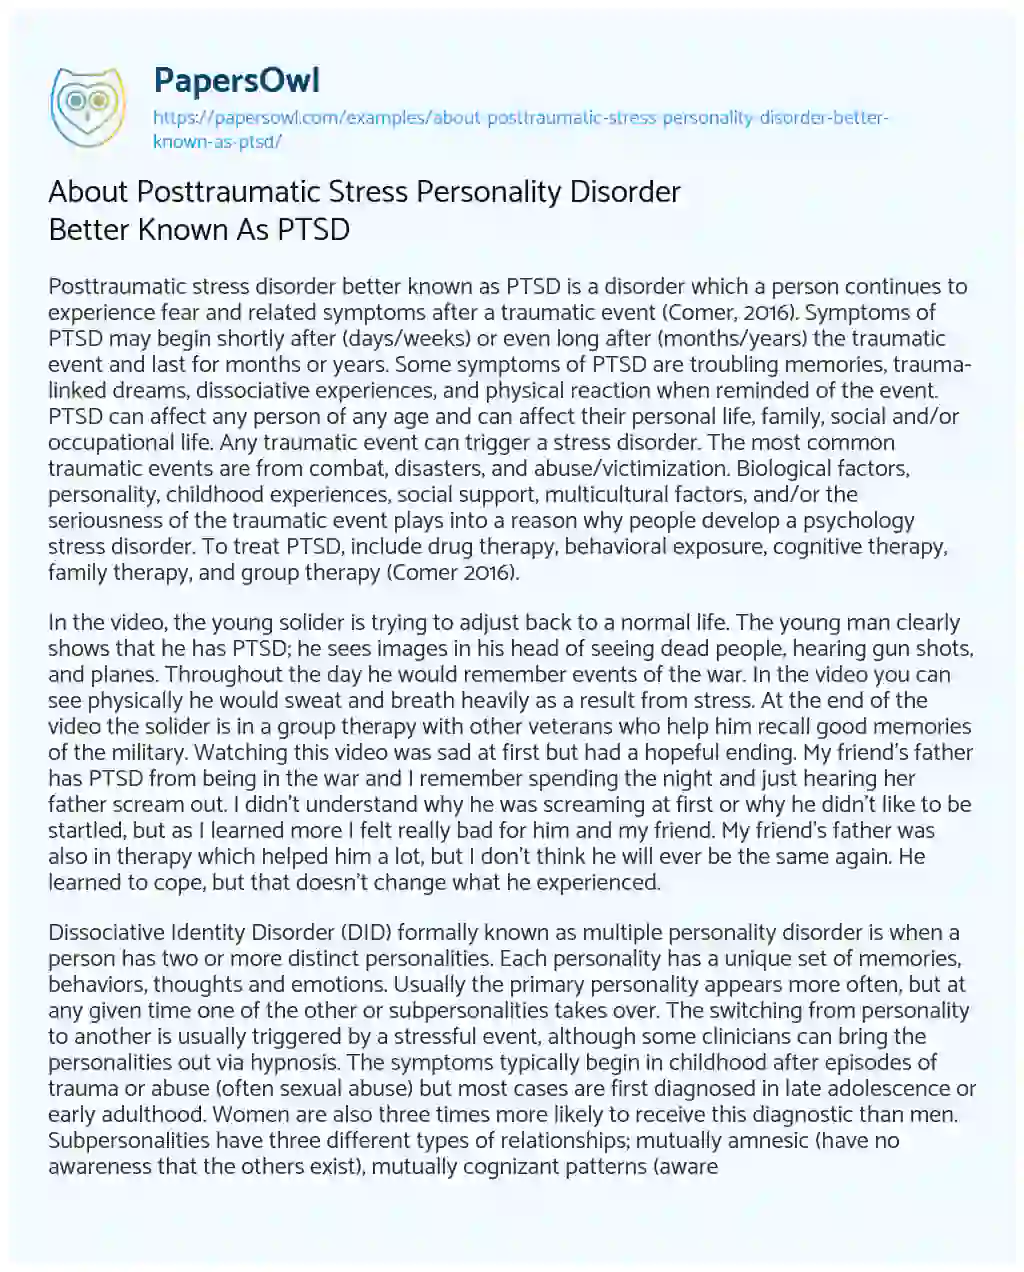 Essay on About Posttraumatic Stress Personality Disorder Better Known as PTSD